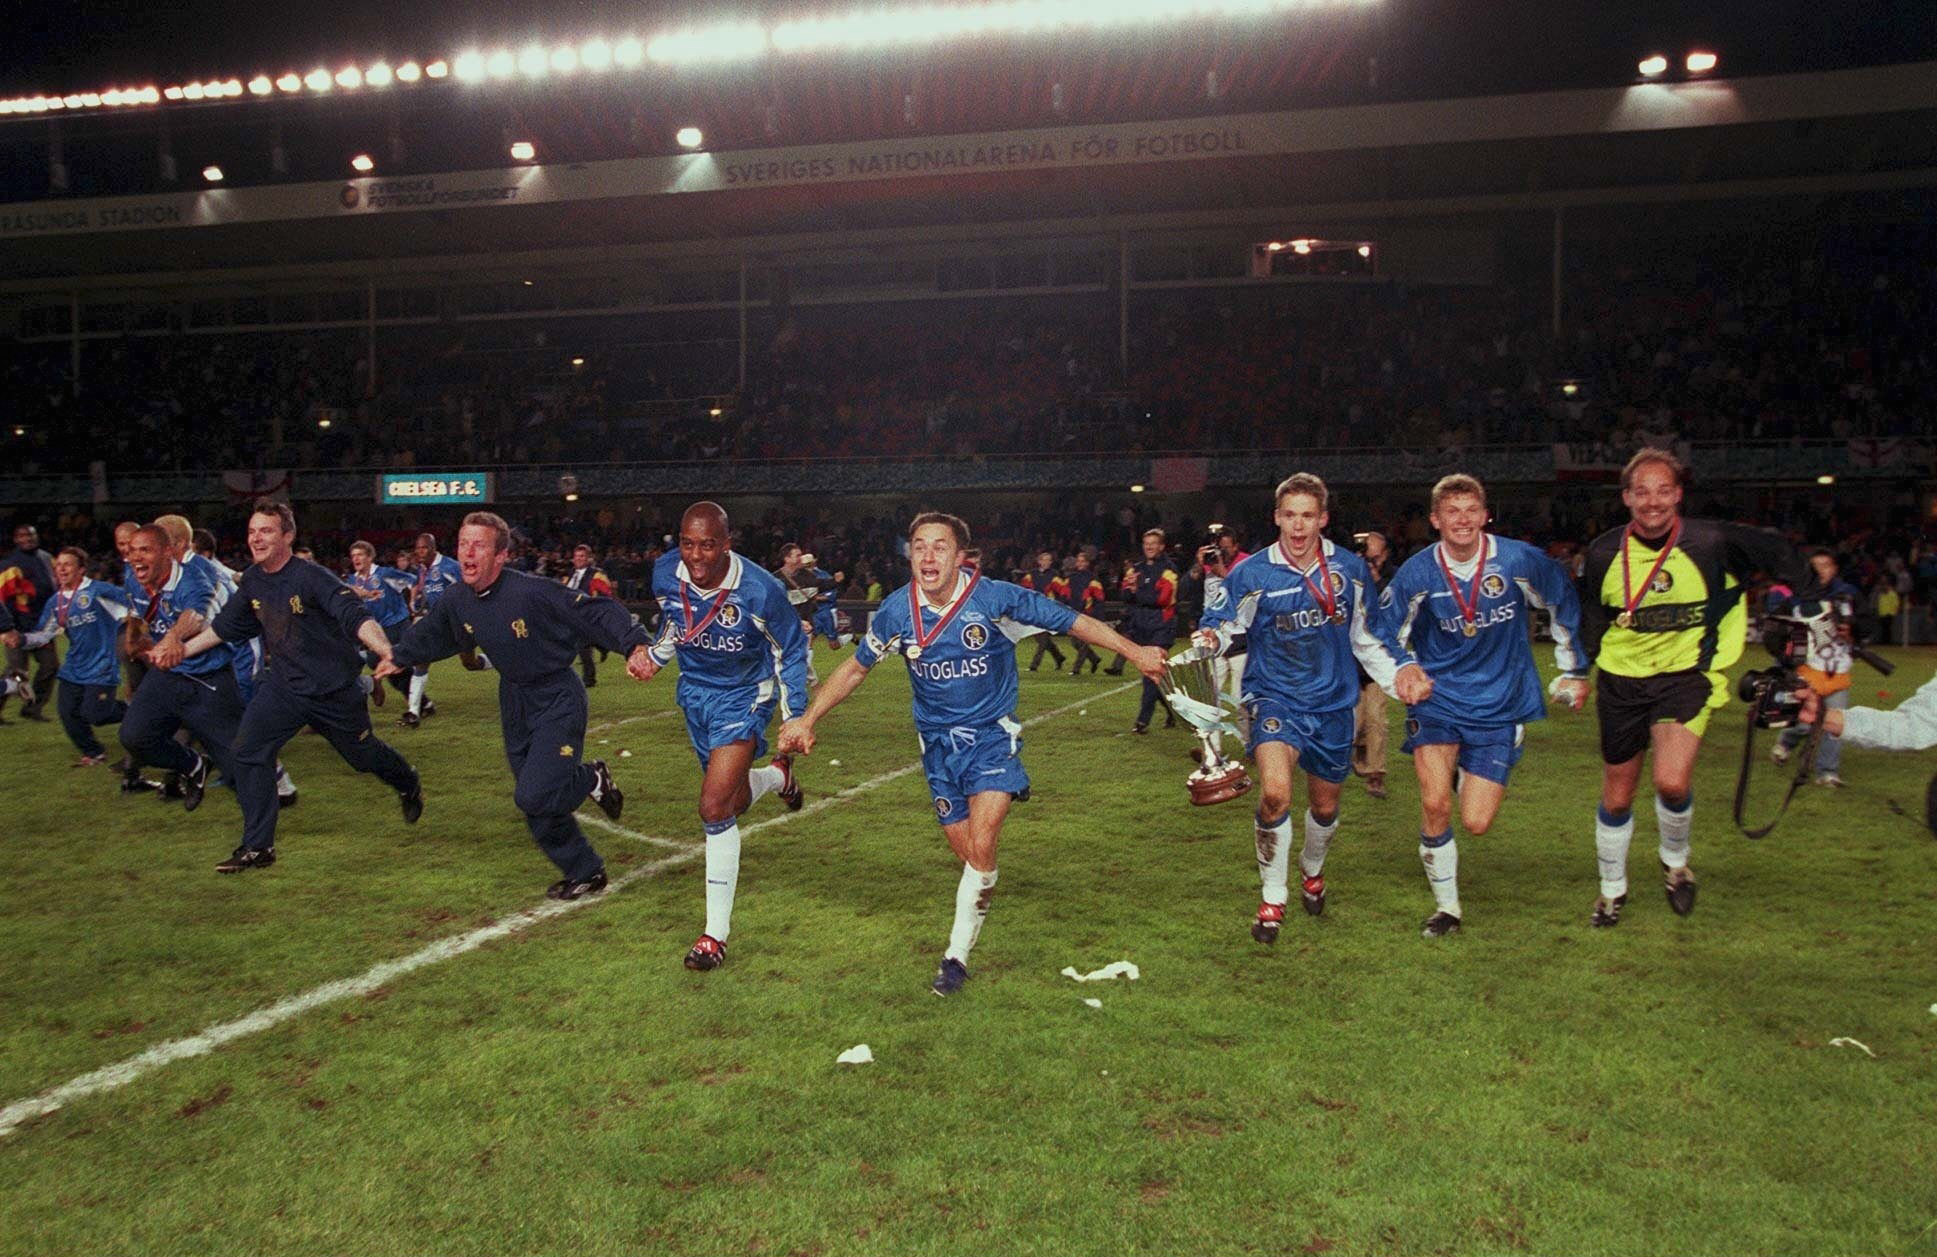 Chelsea celebrate after winning the European Cup Winners Cup in 1998.